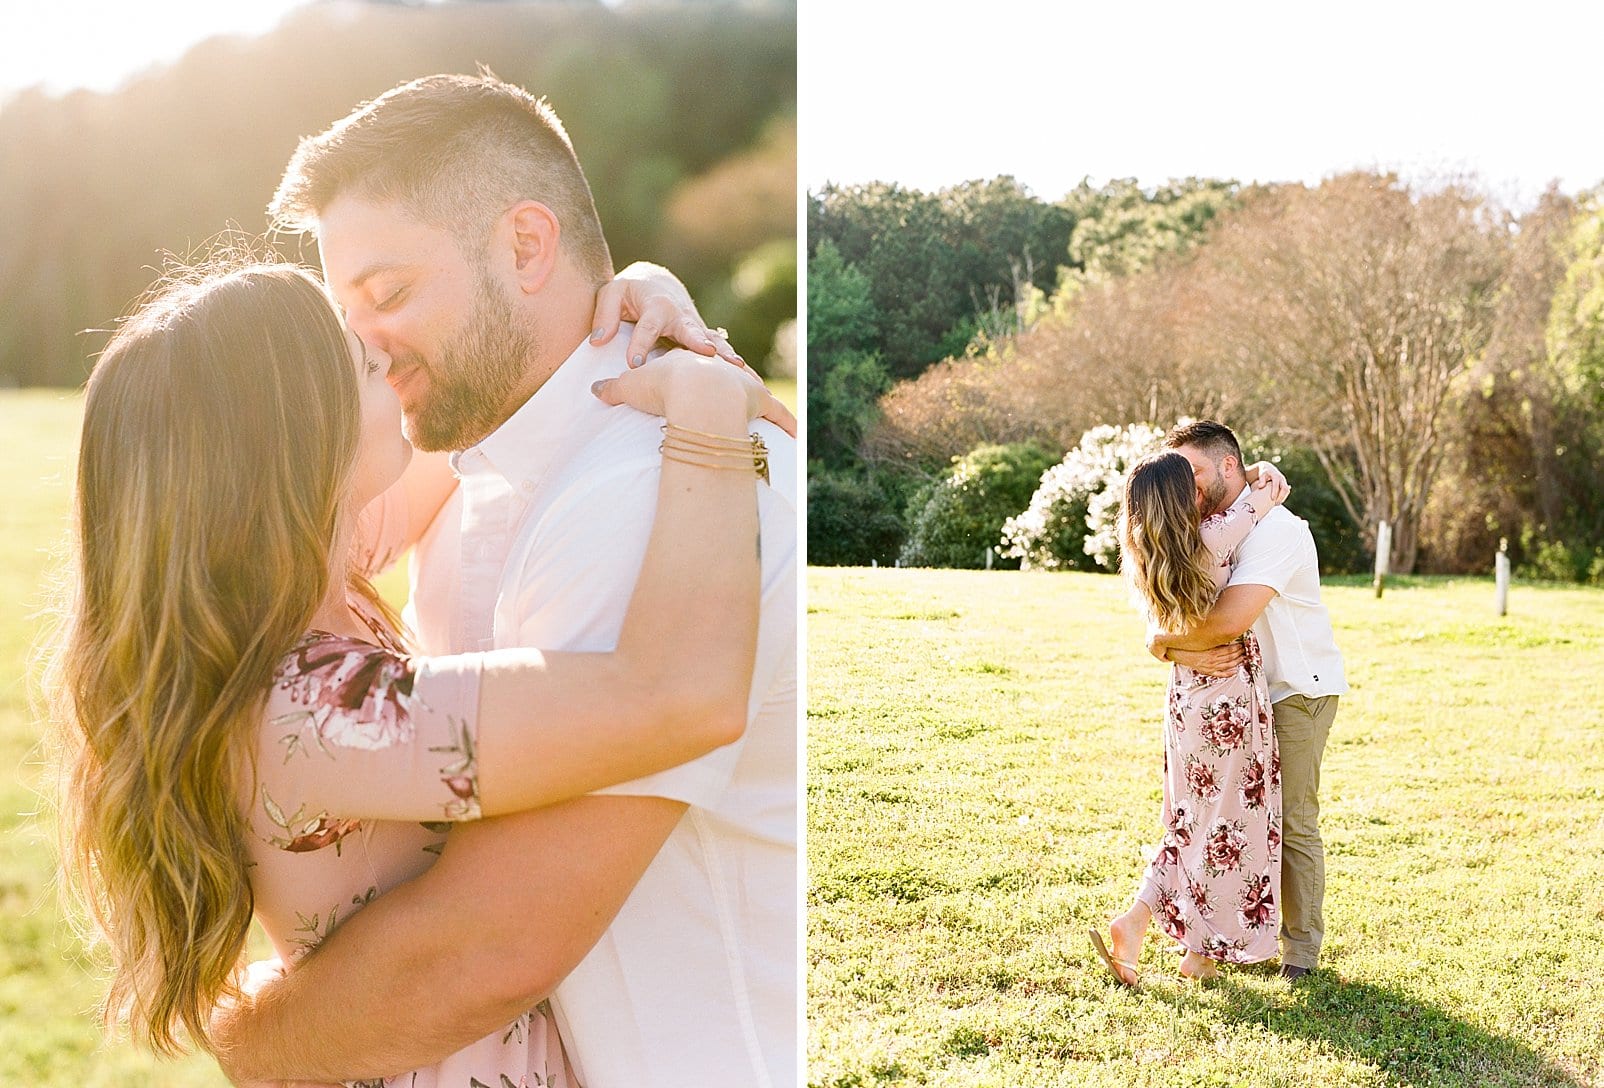 raleigh, nc couple embracing in an open field for engagement photo